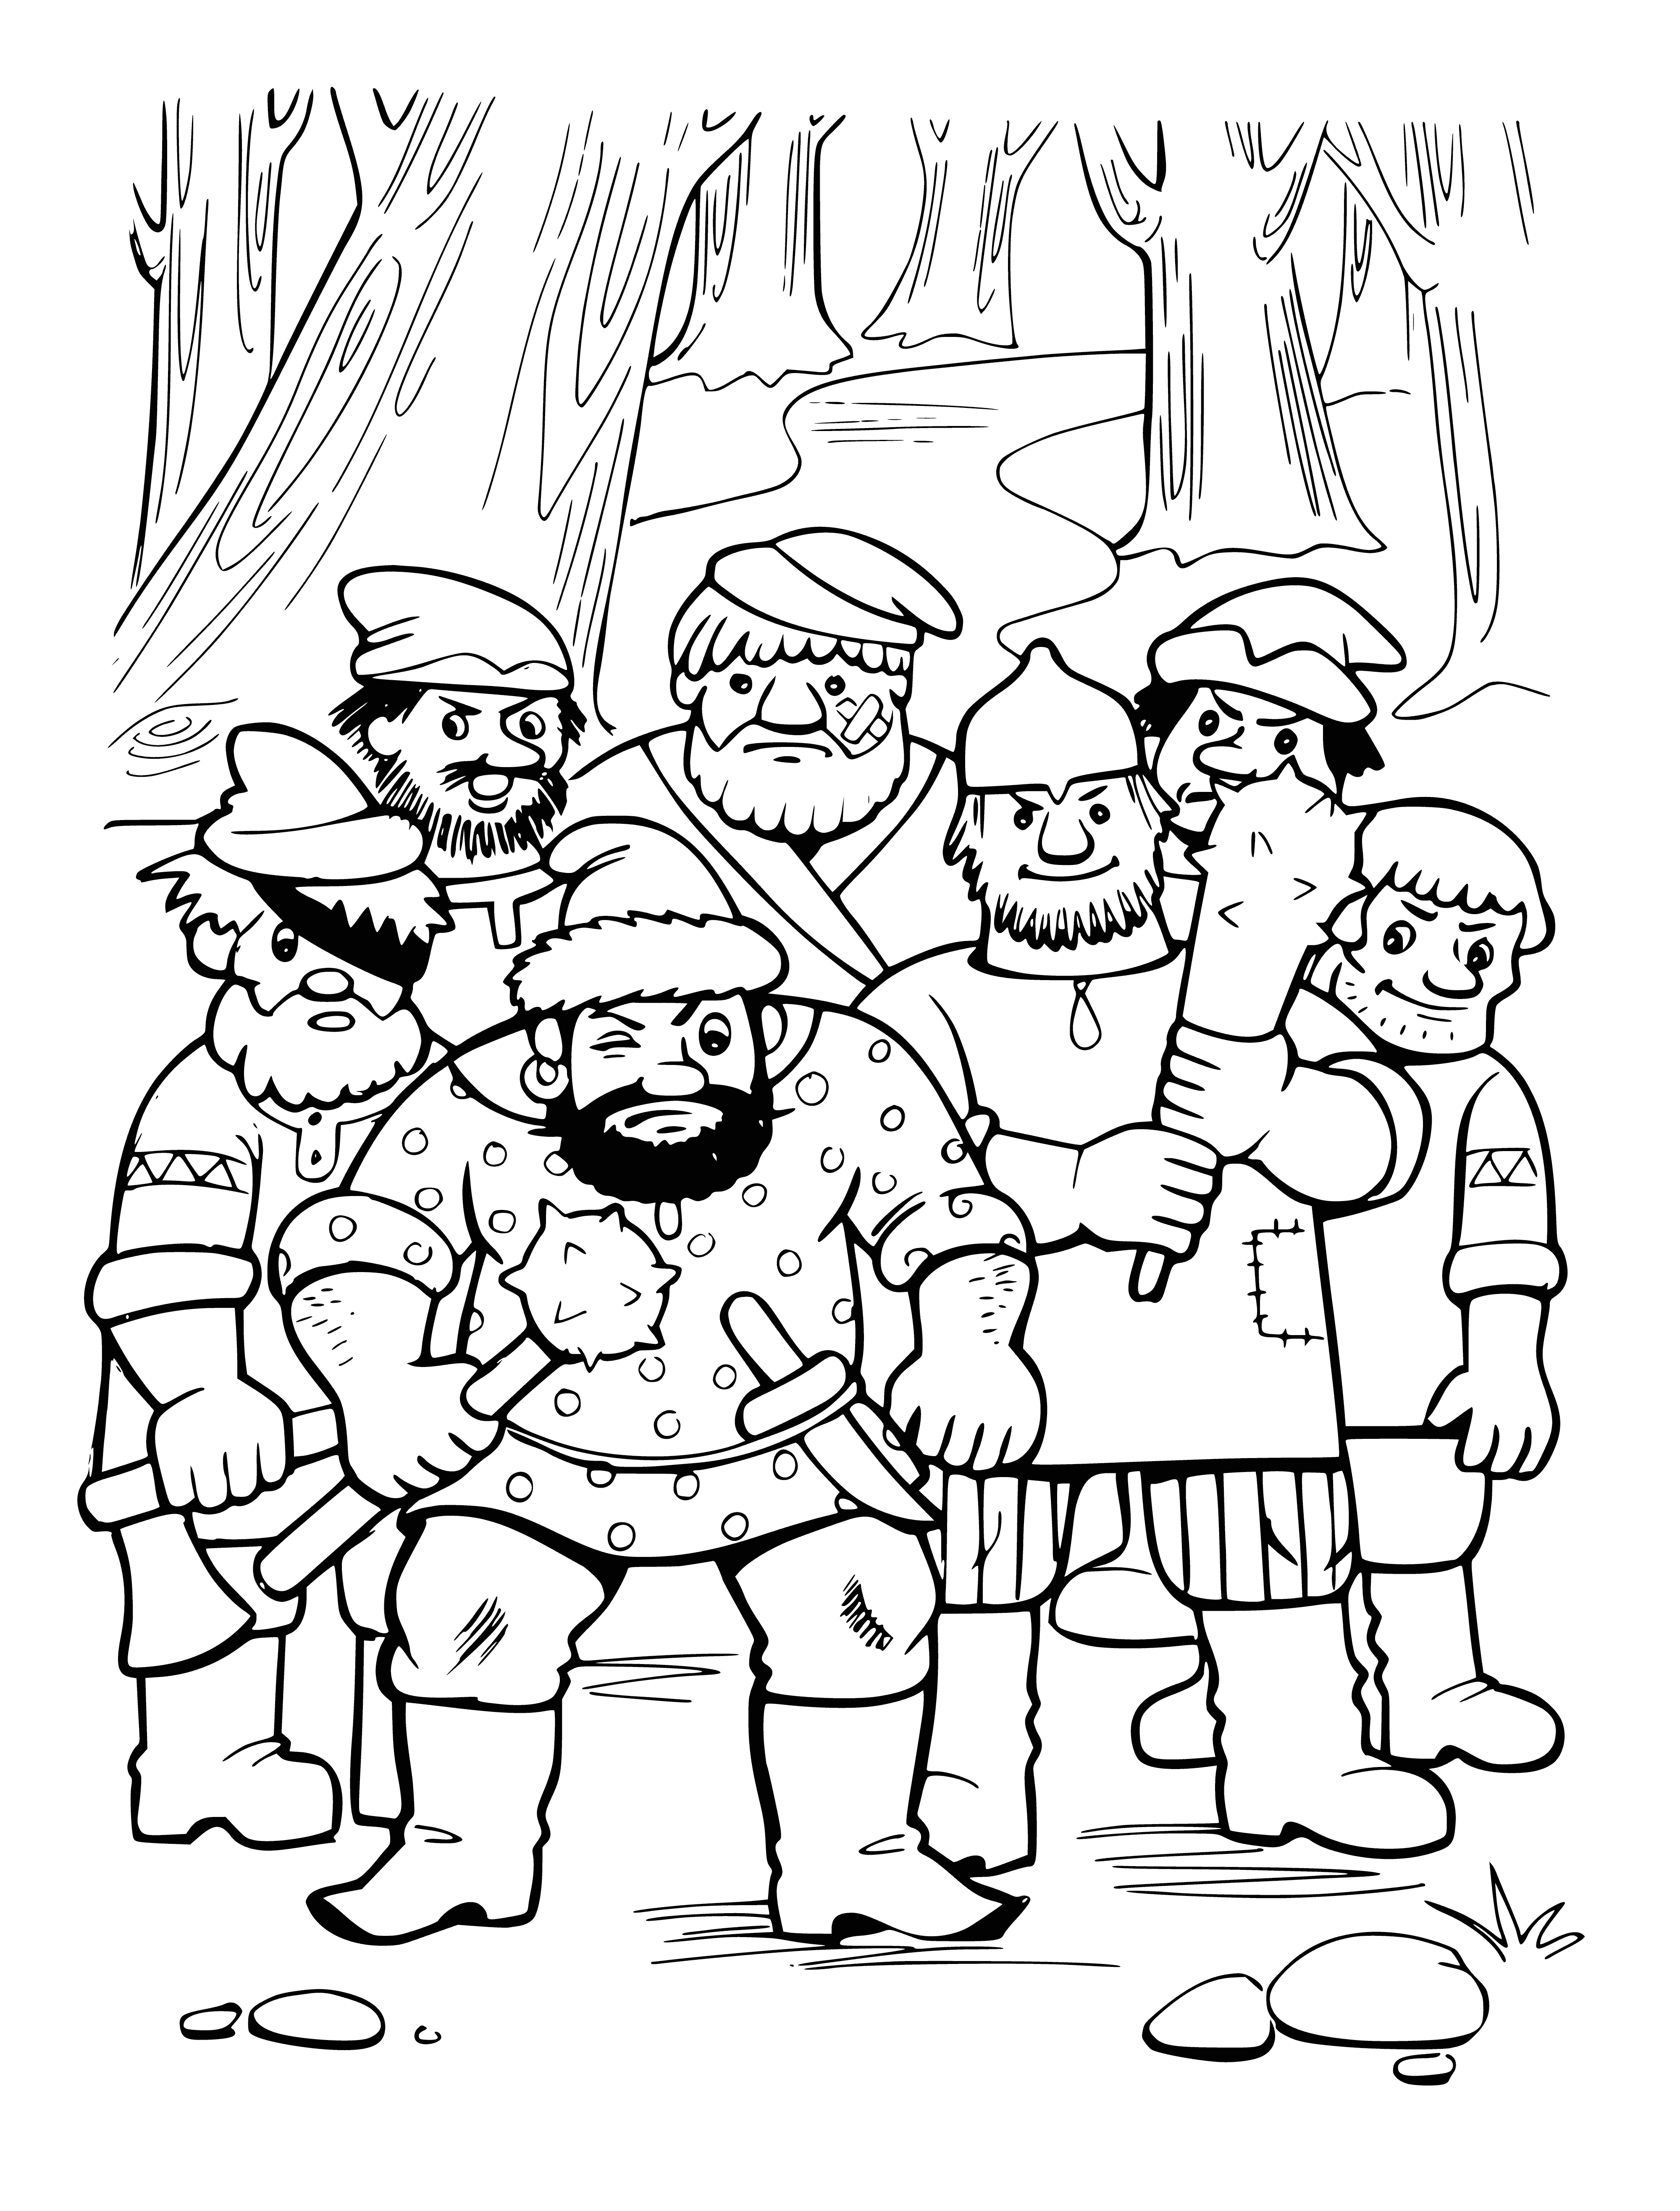 coloring page: Four robbers around a fire in a dark forest. Playing cards & drinking by a wagon of loot + horse tied to a tree.